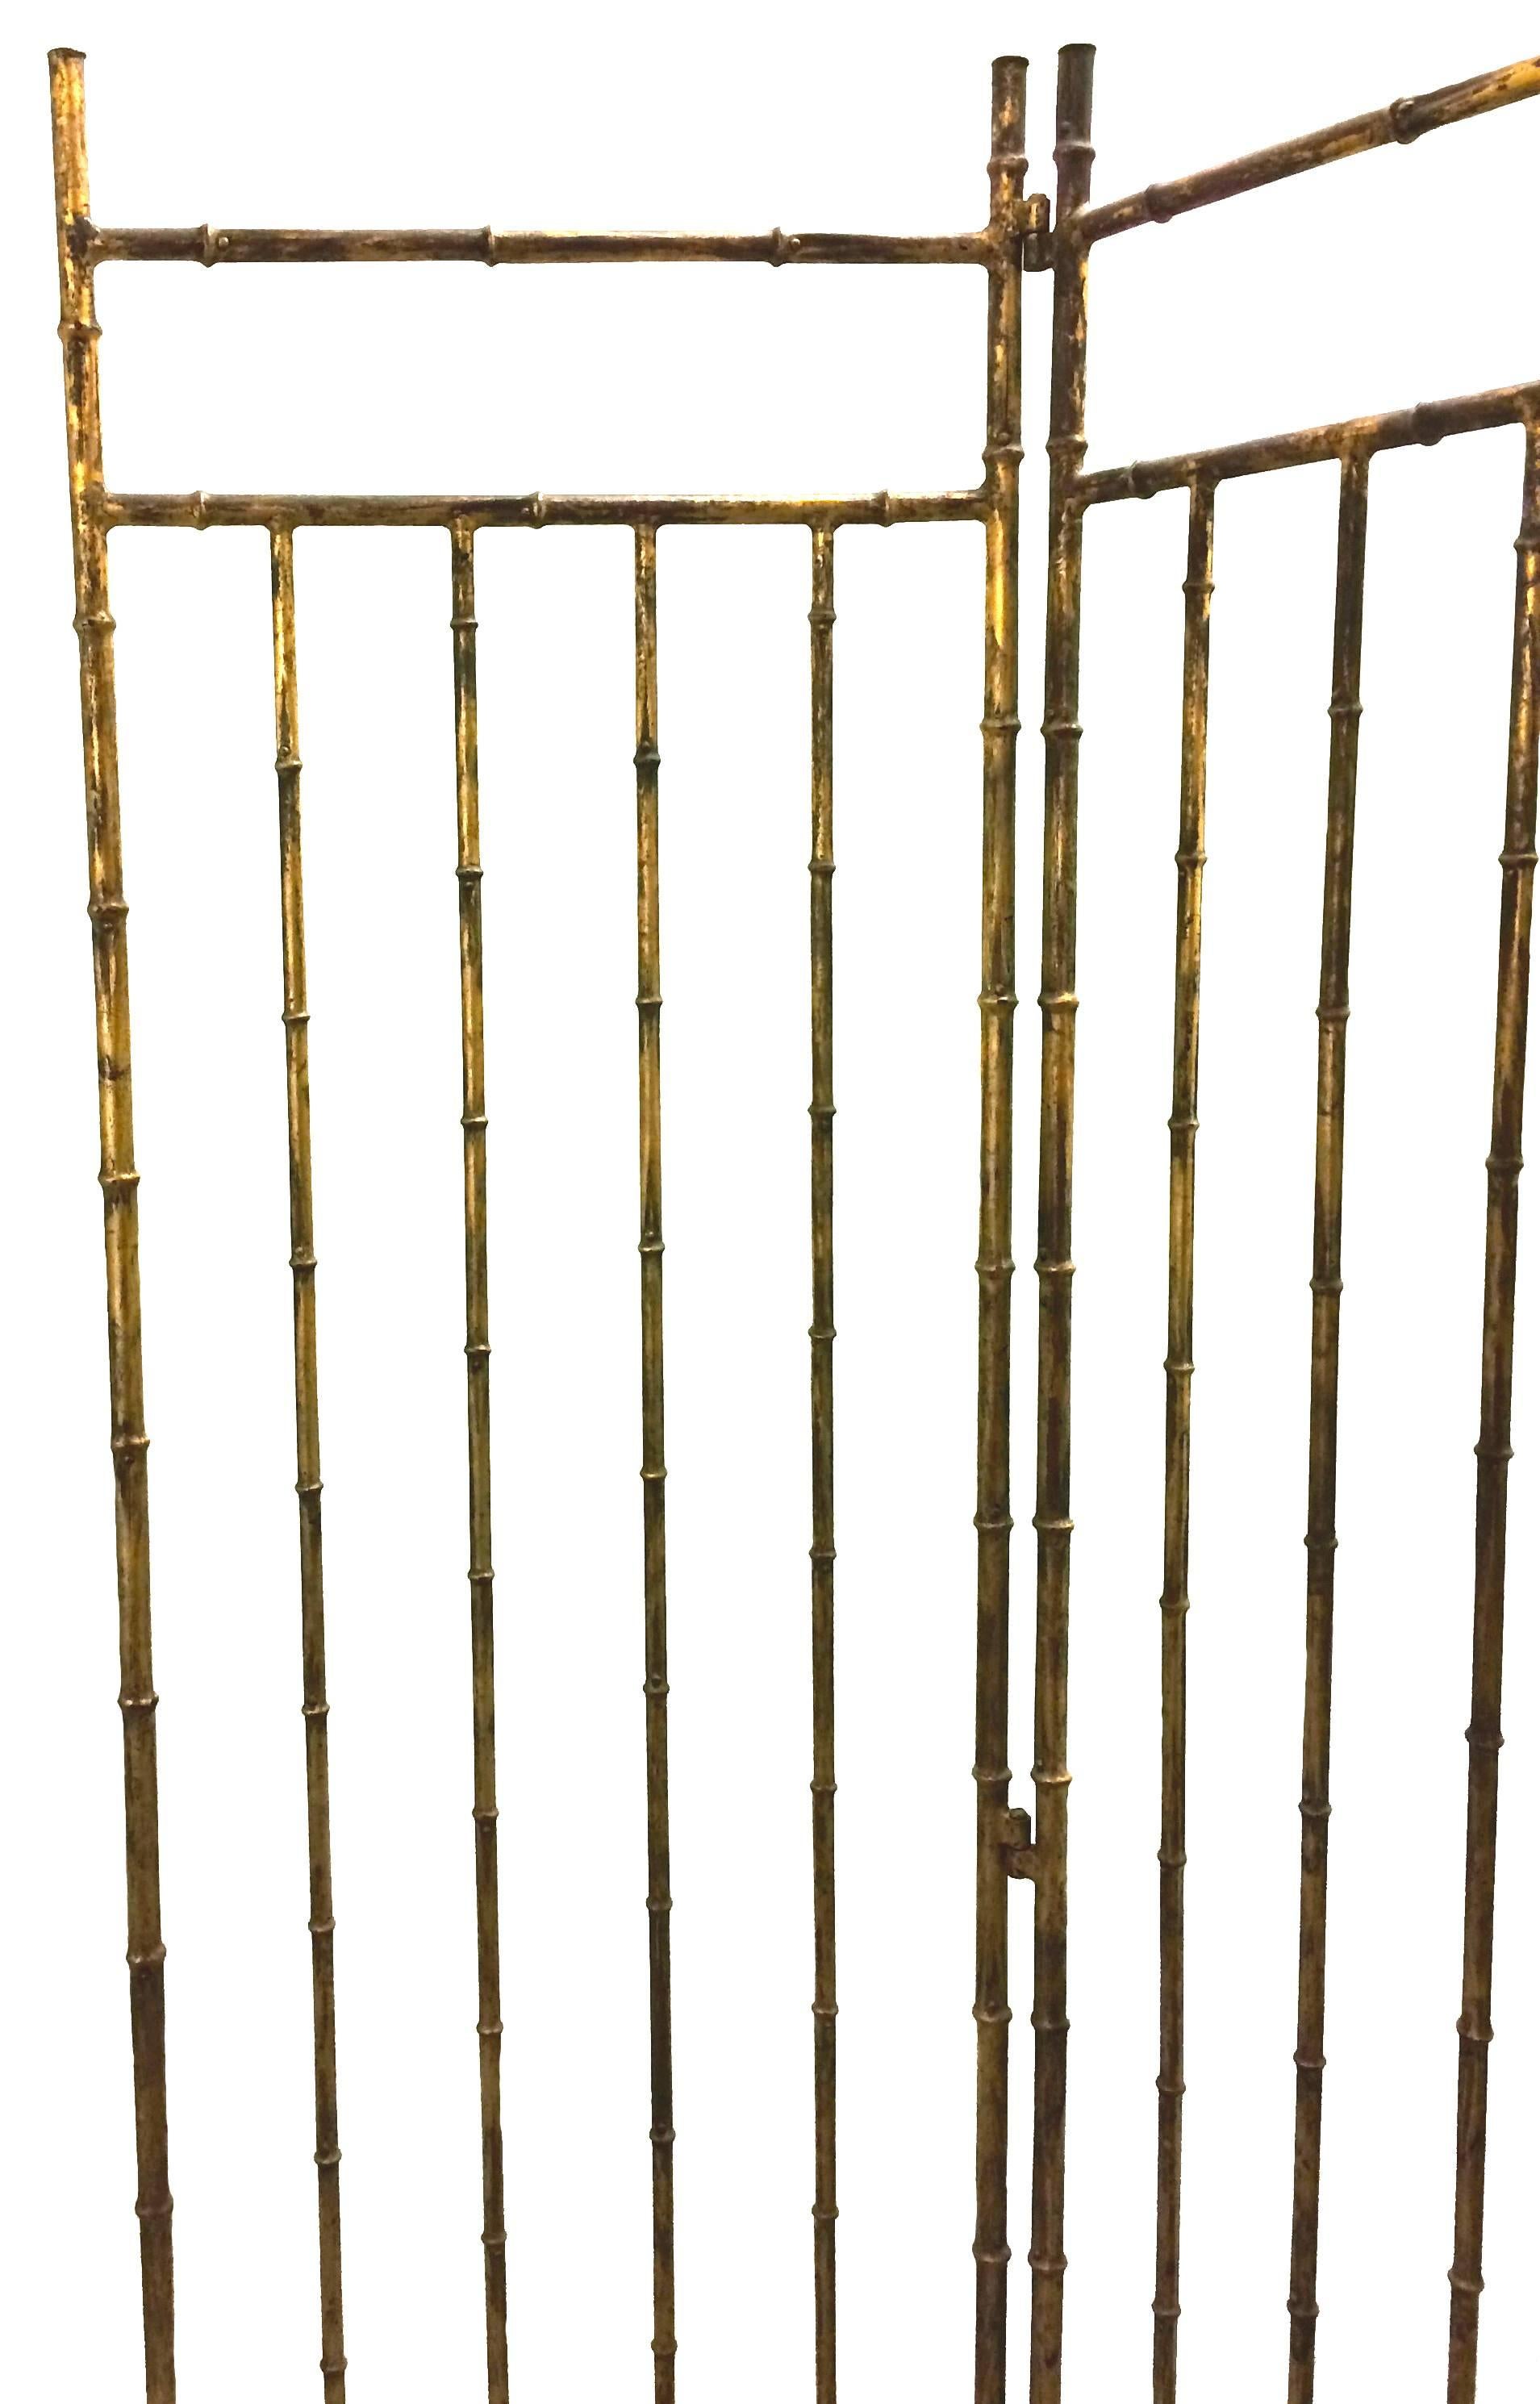 Midcentury chinoiserie gilt metal bamboo three-panel folding screen attributed to Maison Bagues. Heavy, very well made cast brass bamboo with painted gilt finish.